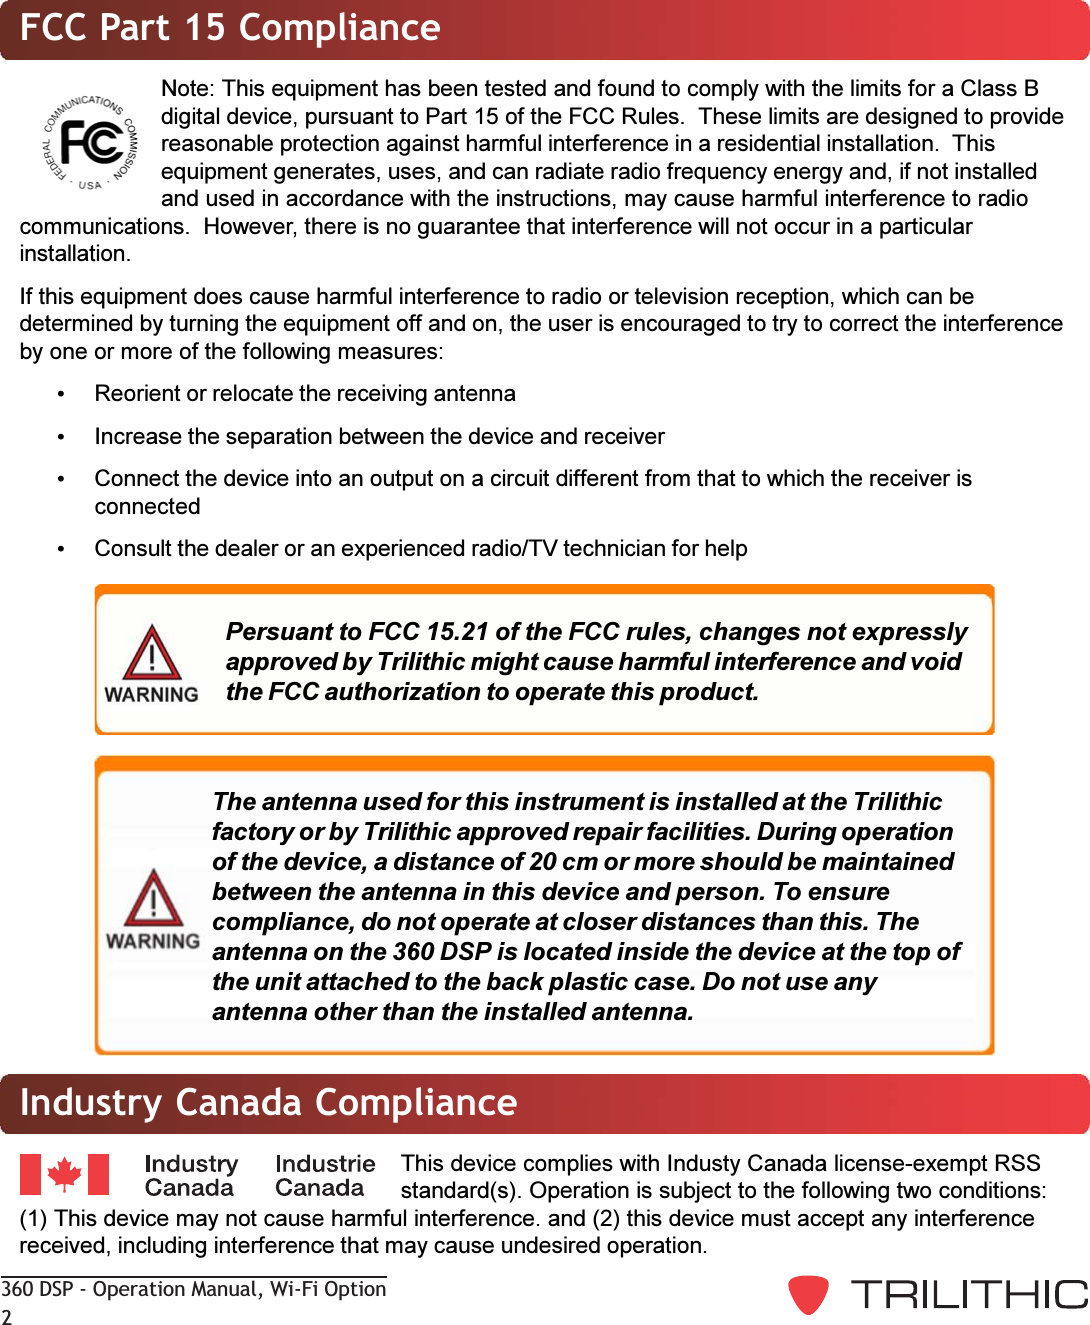 360 DSP - Operation Manual, Wi-Fi Option2Industry Canada ComplianceThis device complies with Industy Canada license-exempt RSSstandard(s). Operation is subject to the following two conditions:(1) This device may not cause harmful interference. and (2) this device must accept any interferencereceived, including interference that may cause undesired operation.FCC Part 15 ComplianceNote: This equipment has been tested and found to comply with the limits for a Class Bdigital device, pursuant to Part 15 of the FCC Rules.  These limits are designed to providereasonable protection against harmful interference in a residential installation.  Thisequipment generates, uses, and can radiate radio frequency energy and, if not installedand used in accordance with the instructions, may cause harmful interference to radiocommunications.  However, there is no guarantee that interference will not occur in a particularinstallation.If this equipment does cause harmful interference to radio or television reception, which can bedetermined by turning the equipment off and on, the user is encouraged to try to correct the interferenceby one or more of the following measures:Reorient or relocate the receiving antennaIncrease the separation between the device and receiverConnect the device into an output on a circuit different from that to which the receiver isconnectedConsult the dealer or an experienced radio/TV technician for helpPersuant to FCC 15.21 of the FCC rules, changes not expresslyapproved by Trilithic might cause harmful interference and voidthe FCC authorization to operate this product.The antenna used for this instrument is installed at the Trilithicfactory or by Trilithic approved repair facilities. During operationof the device, a distance of 20 cm or more should be maintainedbetween the antenna in this device and person. To ensurecompliance, do not operate at closer distances than this. Theantenna on the 360 DSP is located inside the device at the top ofthe unit attached to the back plastic case. Do not use anyantenna other than the installed antenna.